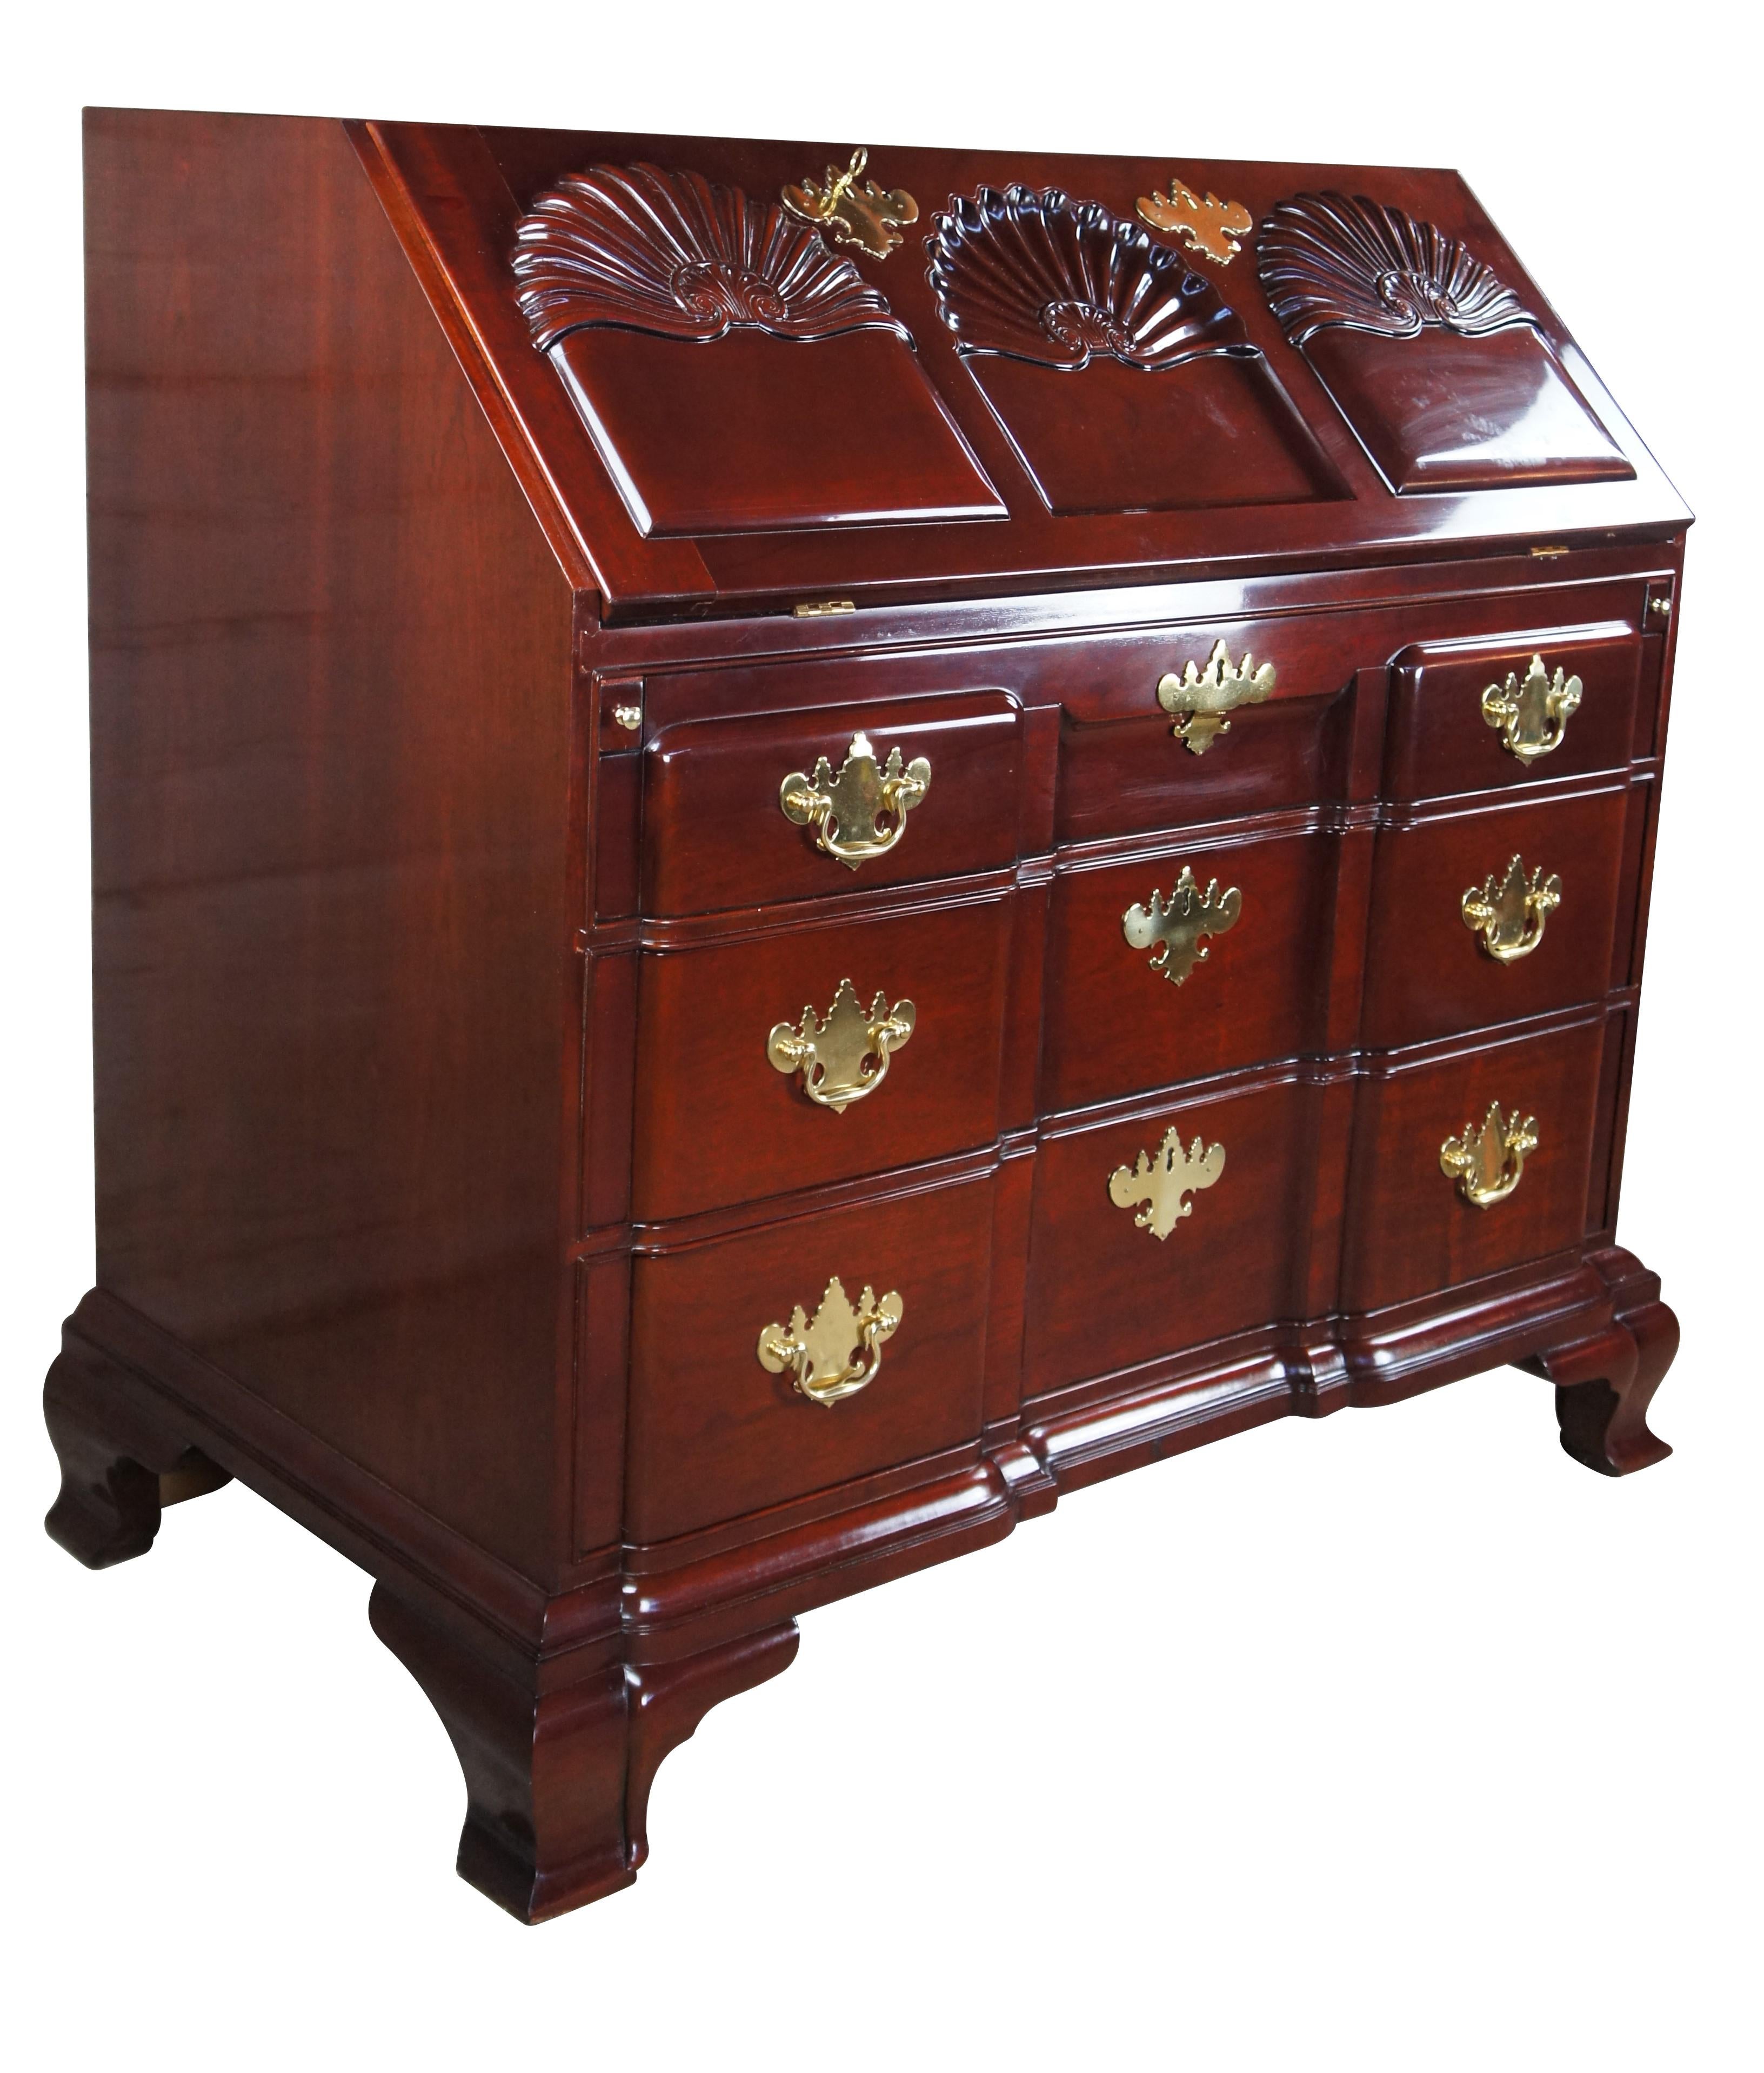 Kindel Winterthur Collection Mahogany Goddard Townsend Blockfront Secretary Writing Desk. Made from mahogany with a high sheen finish. This exception example of a late 18th century piece features an ornately scalloped slant front over three